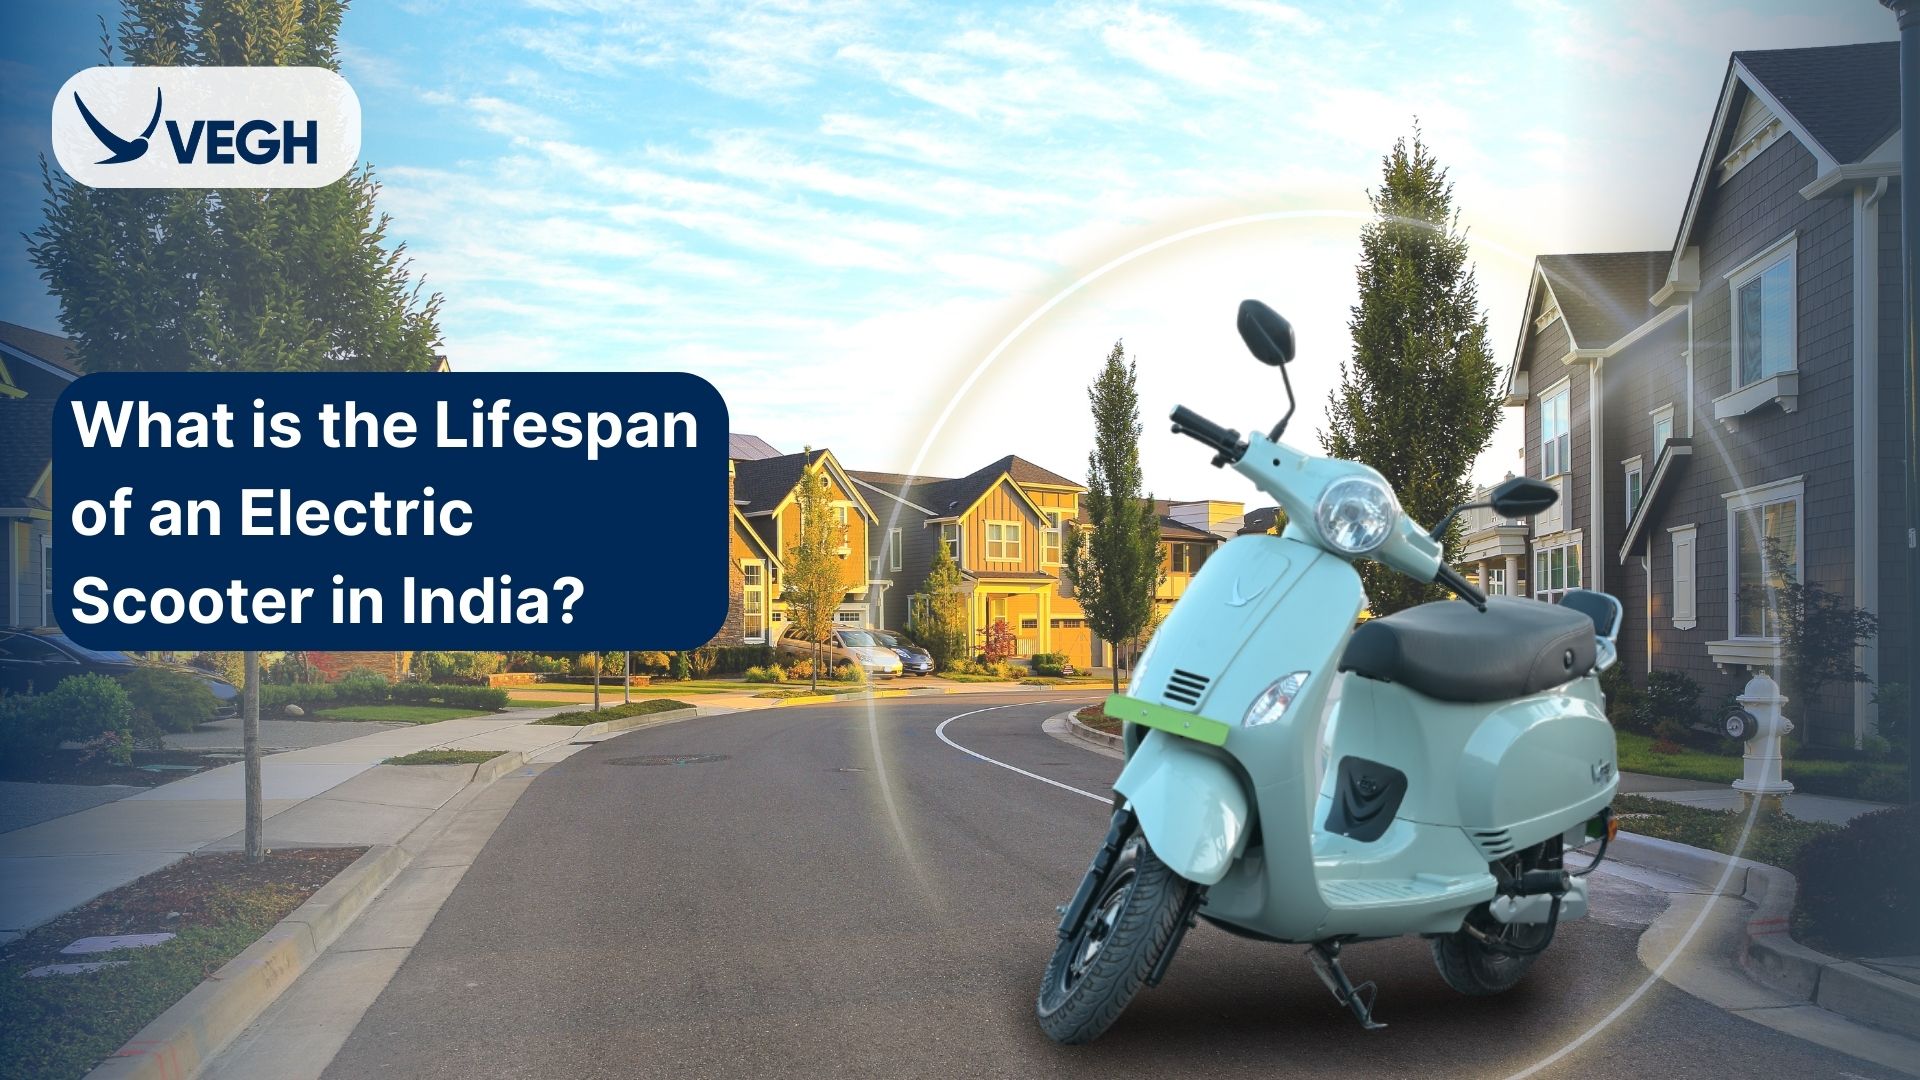 What is the Lifespan of an Electric Scooter in India